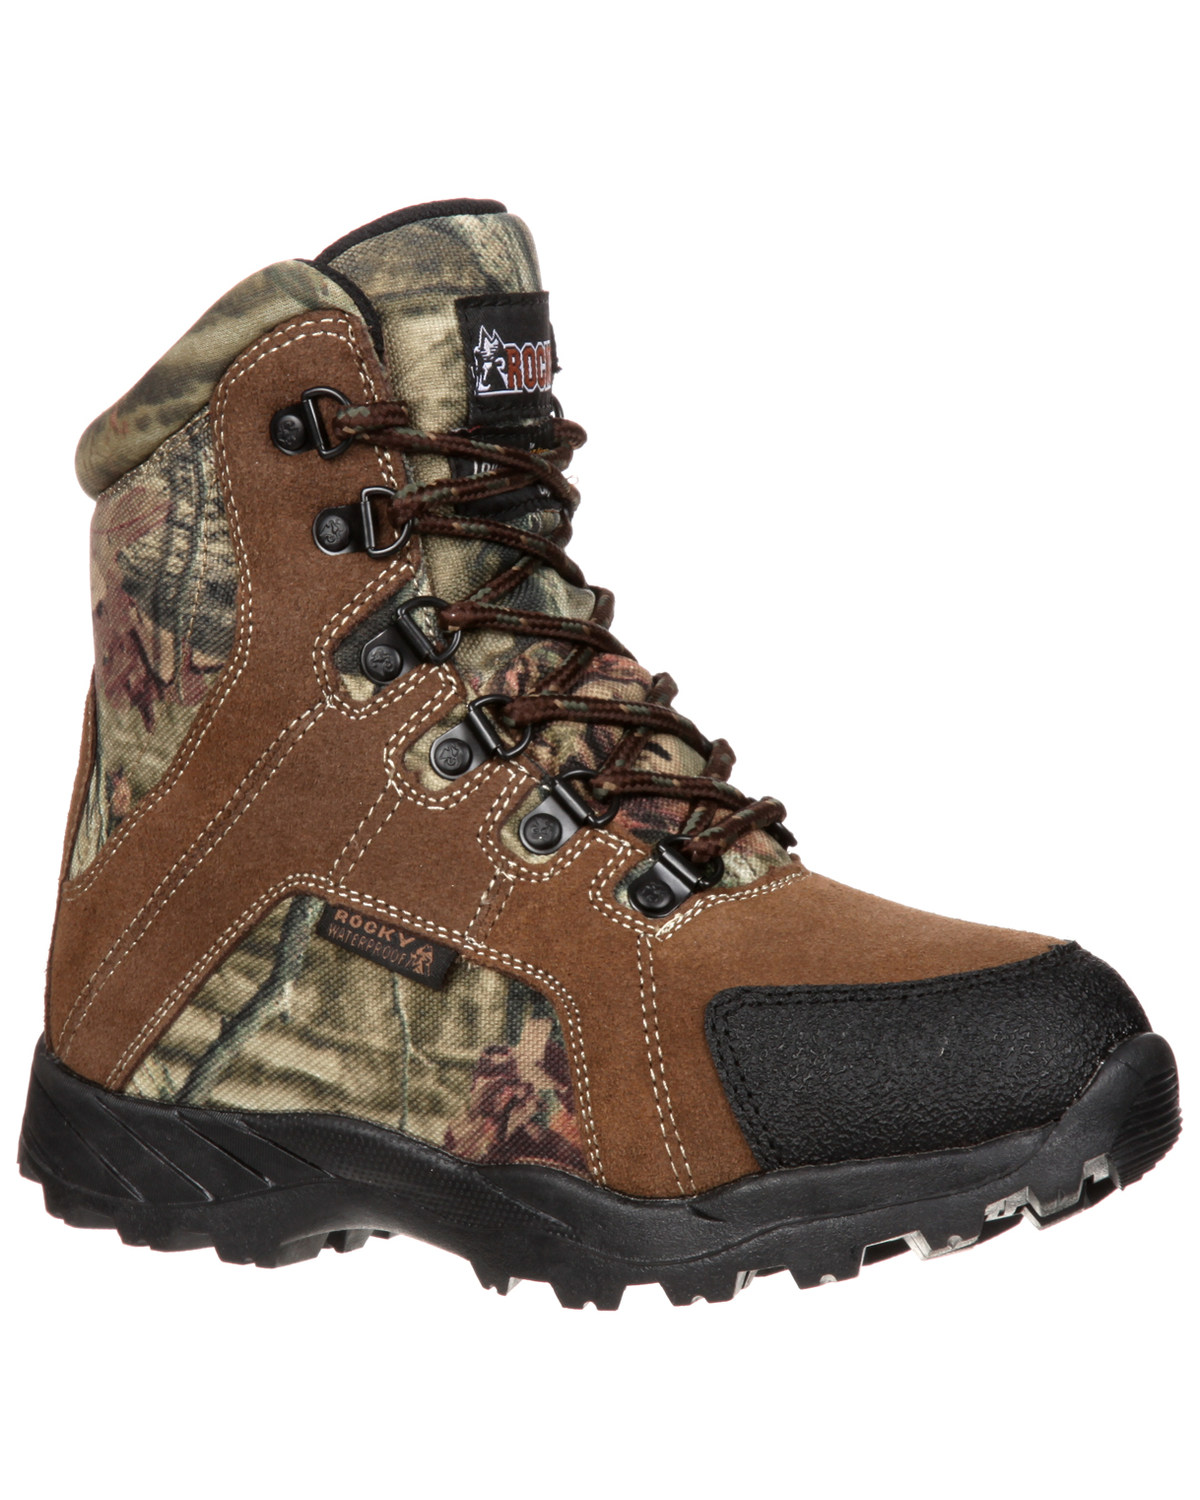 Rocky Boys' Hunting Waterproof Insulated Boots